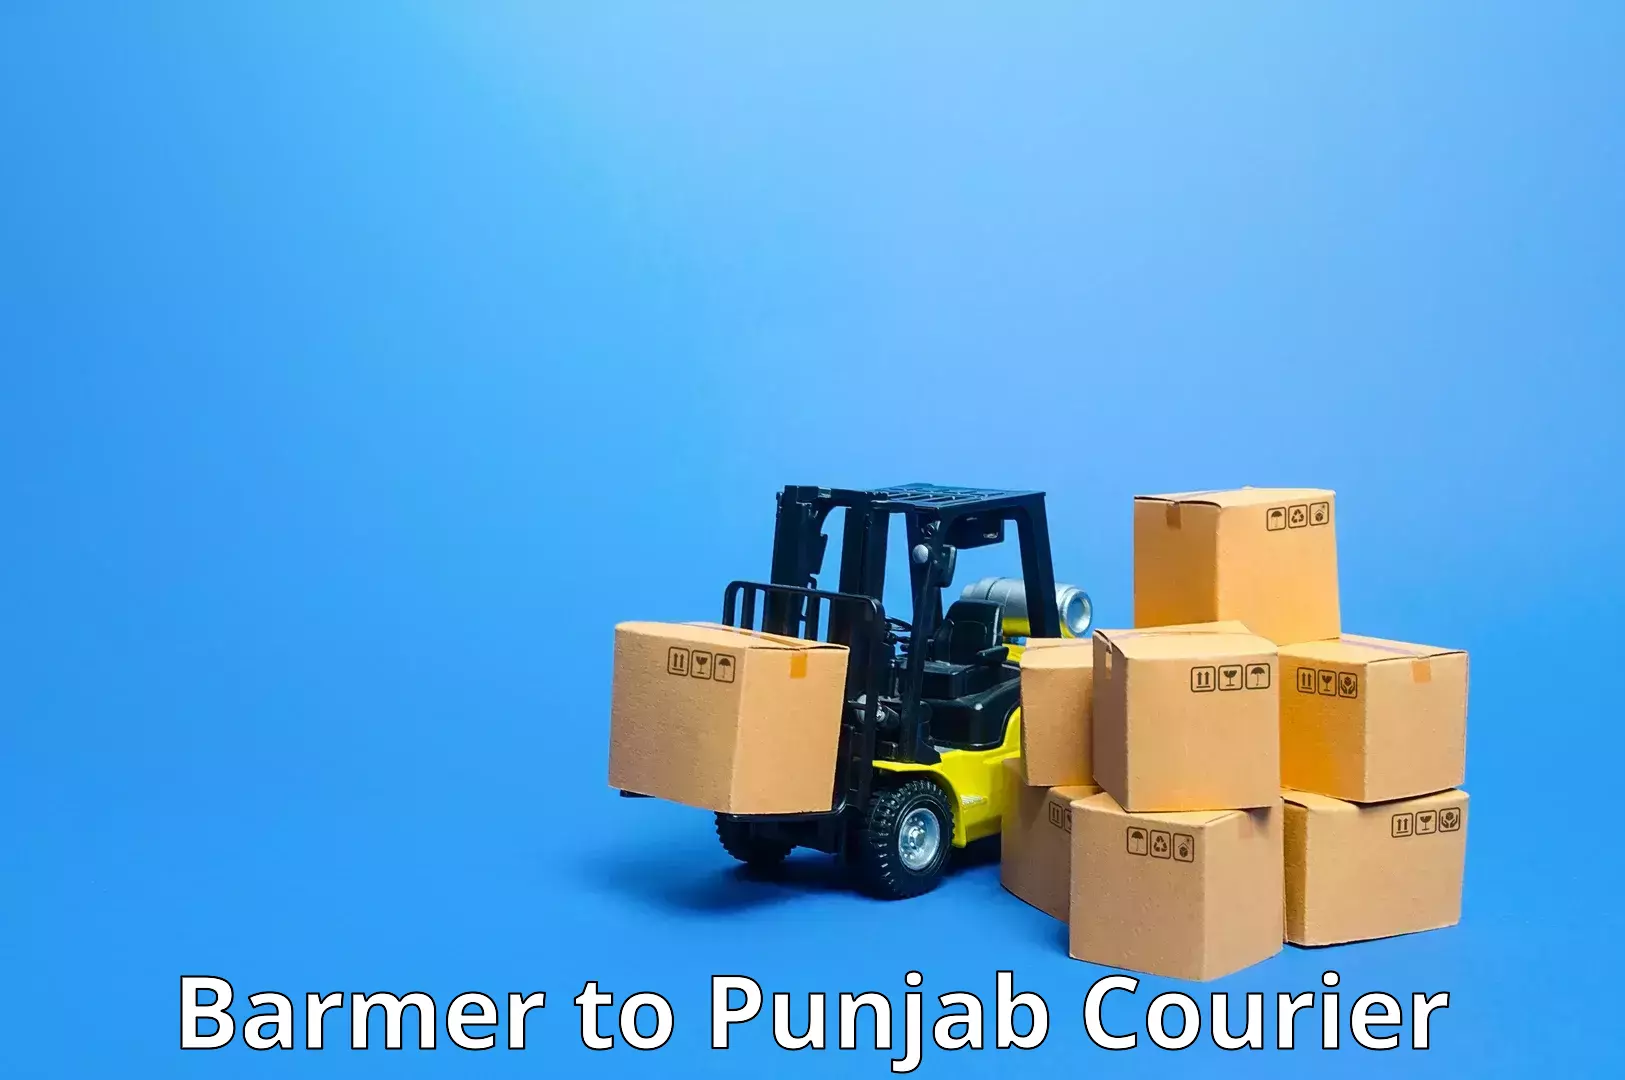 Express delivery capabilities Barmer to Punjab